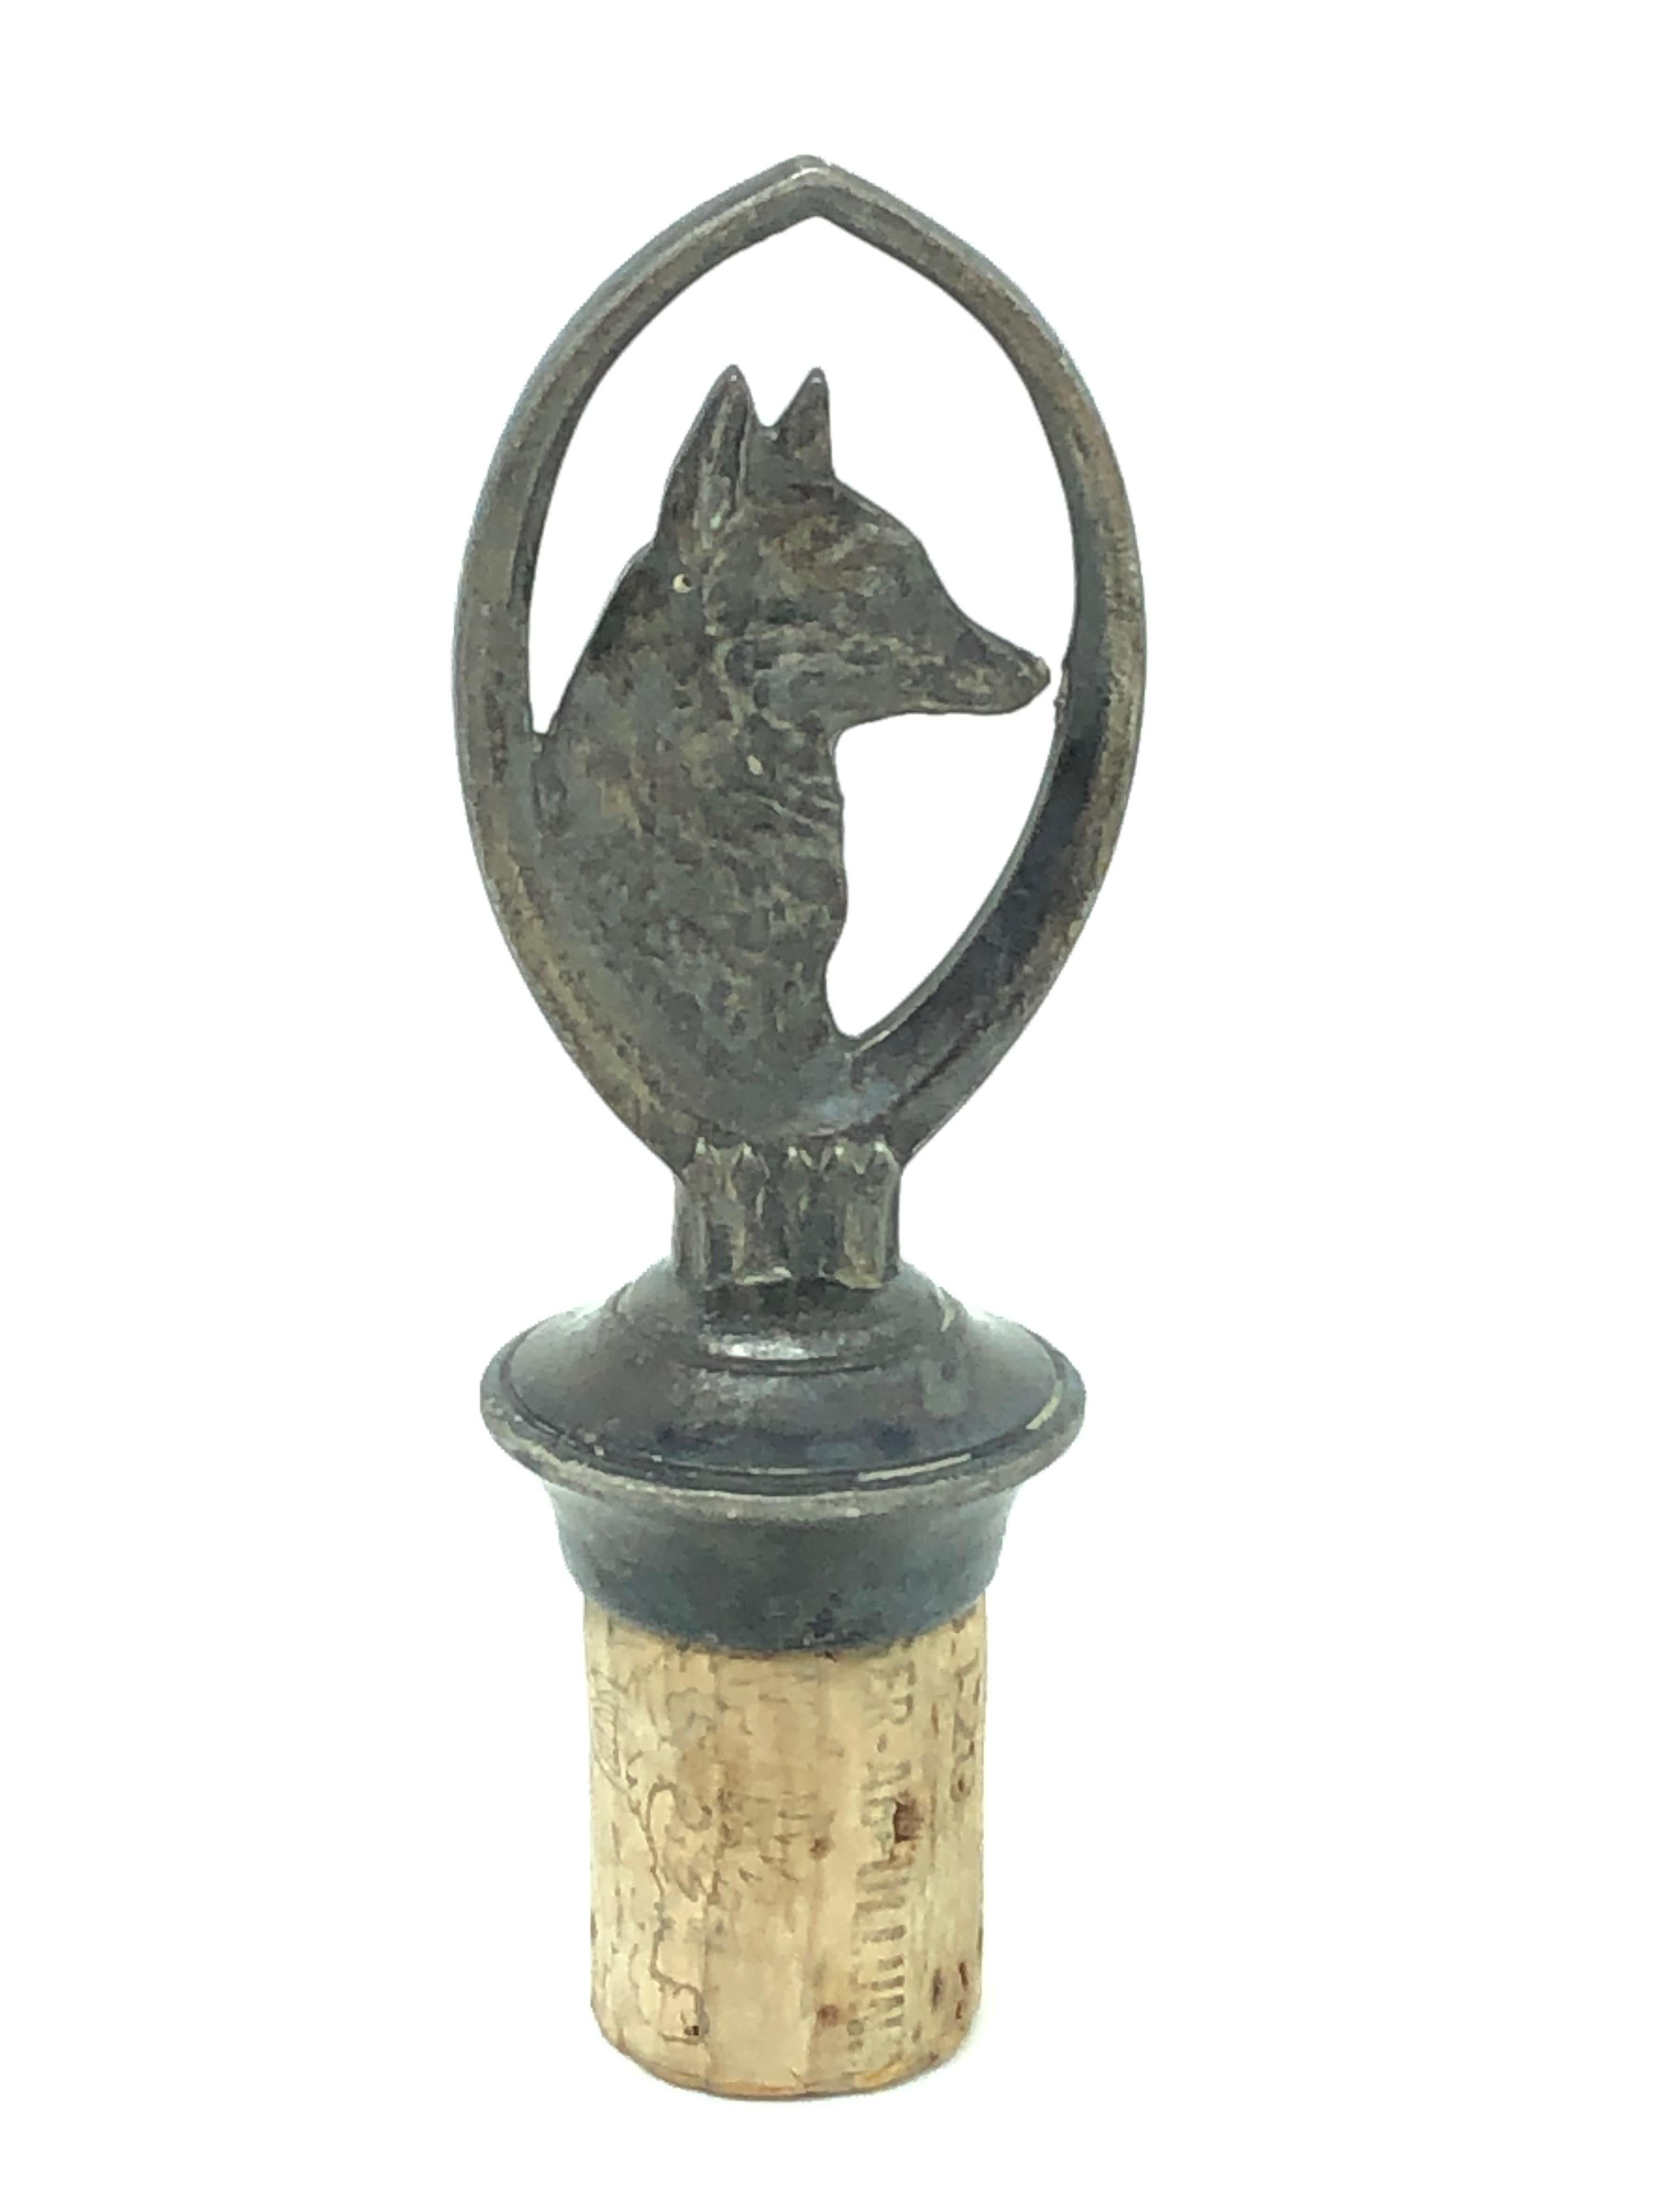 A beautiful metal and cork bottle stopper. Some wear with a nice patina, but this is old-age. Made of metal and cork. A beautiful nice Barware item or just a display item in your collections of antique bottle stoppers.

 